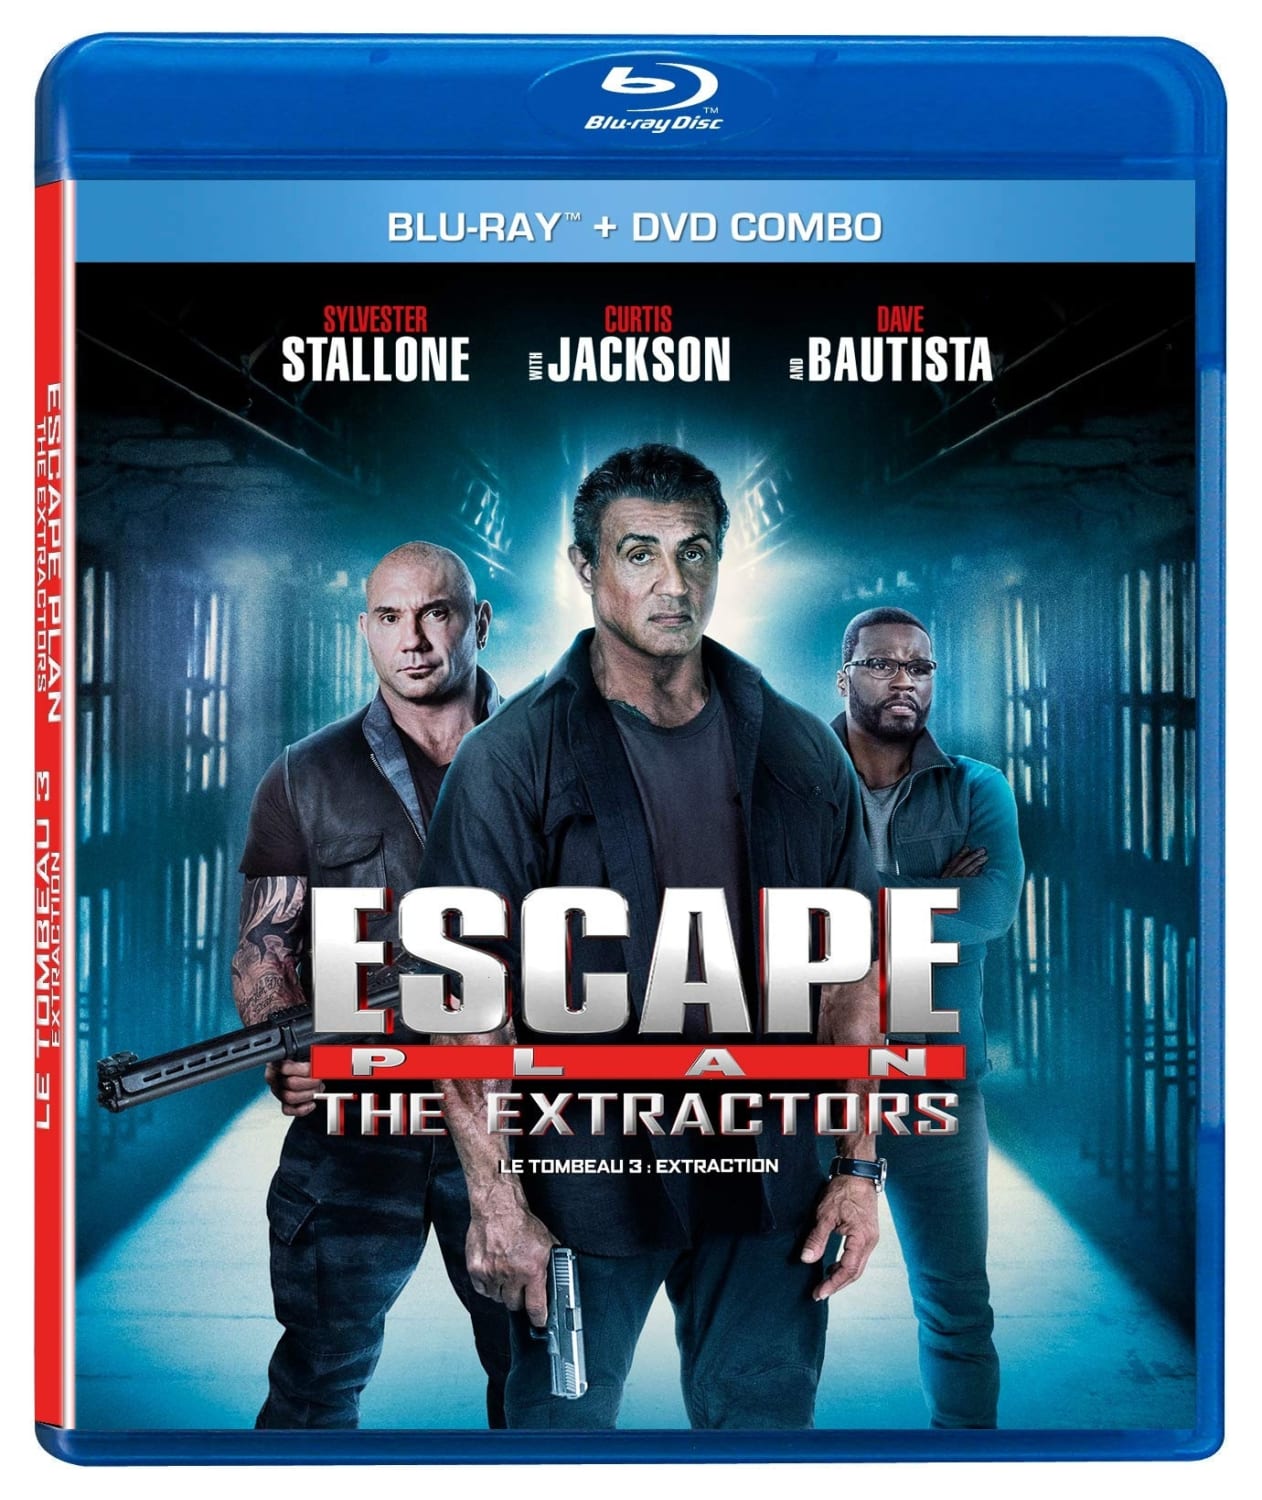 Escape Plan 3: The Extractors (DVD / Blu-ray) on MovieShack